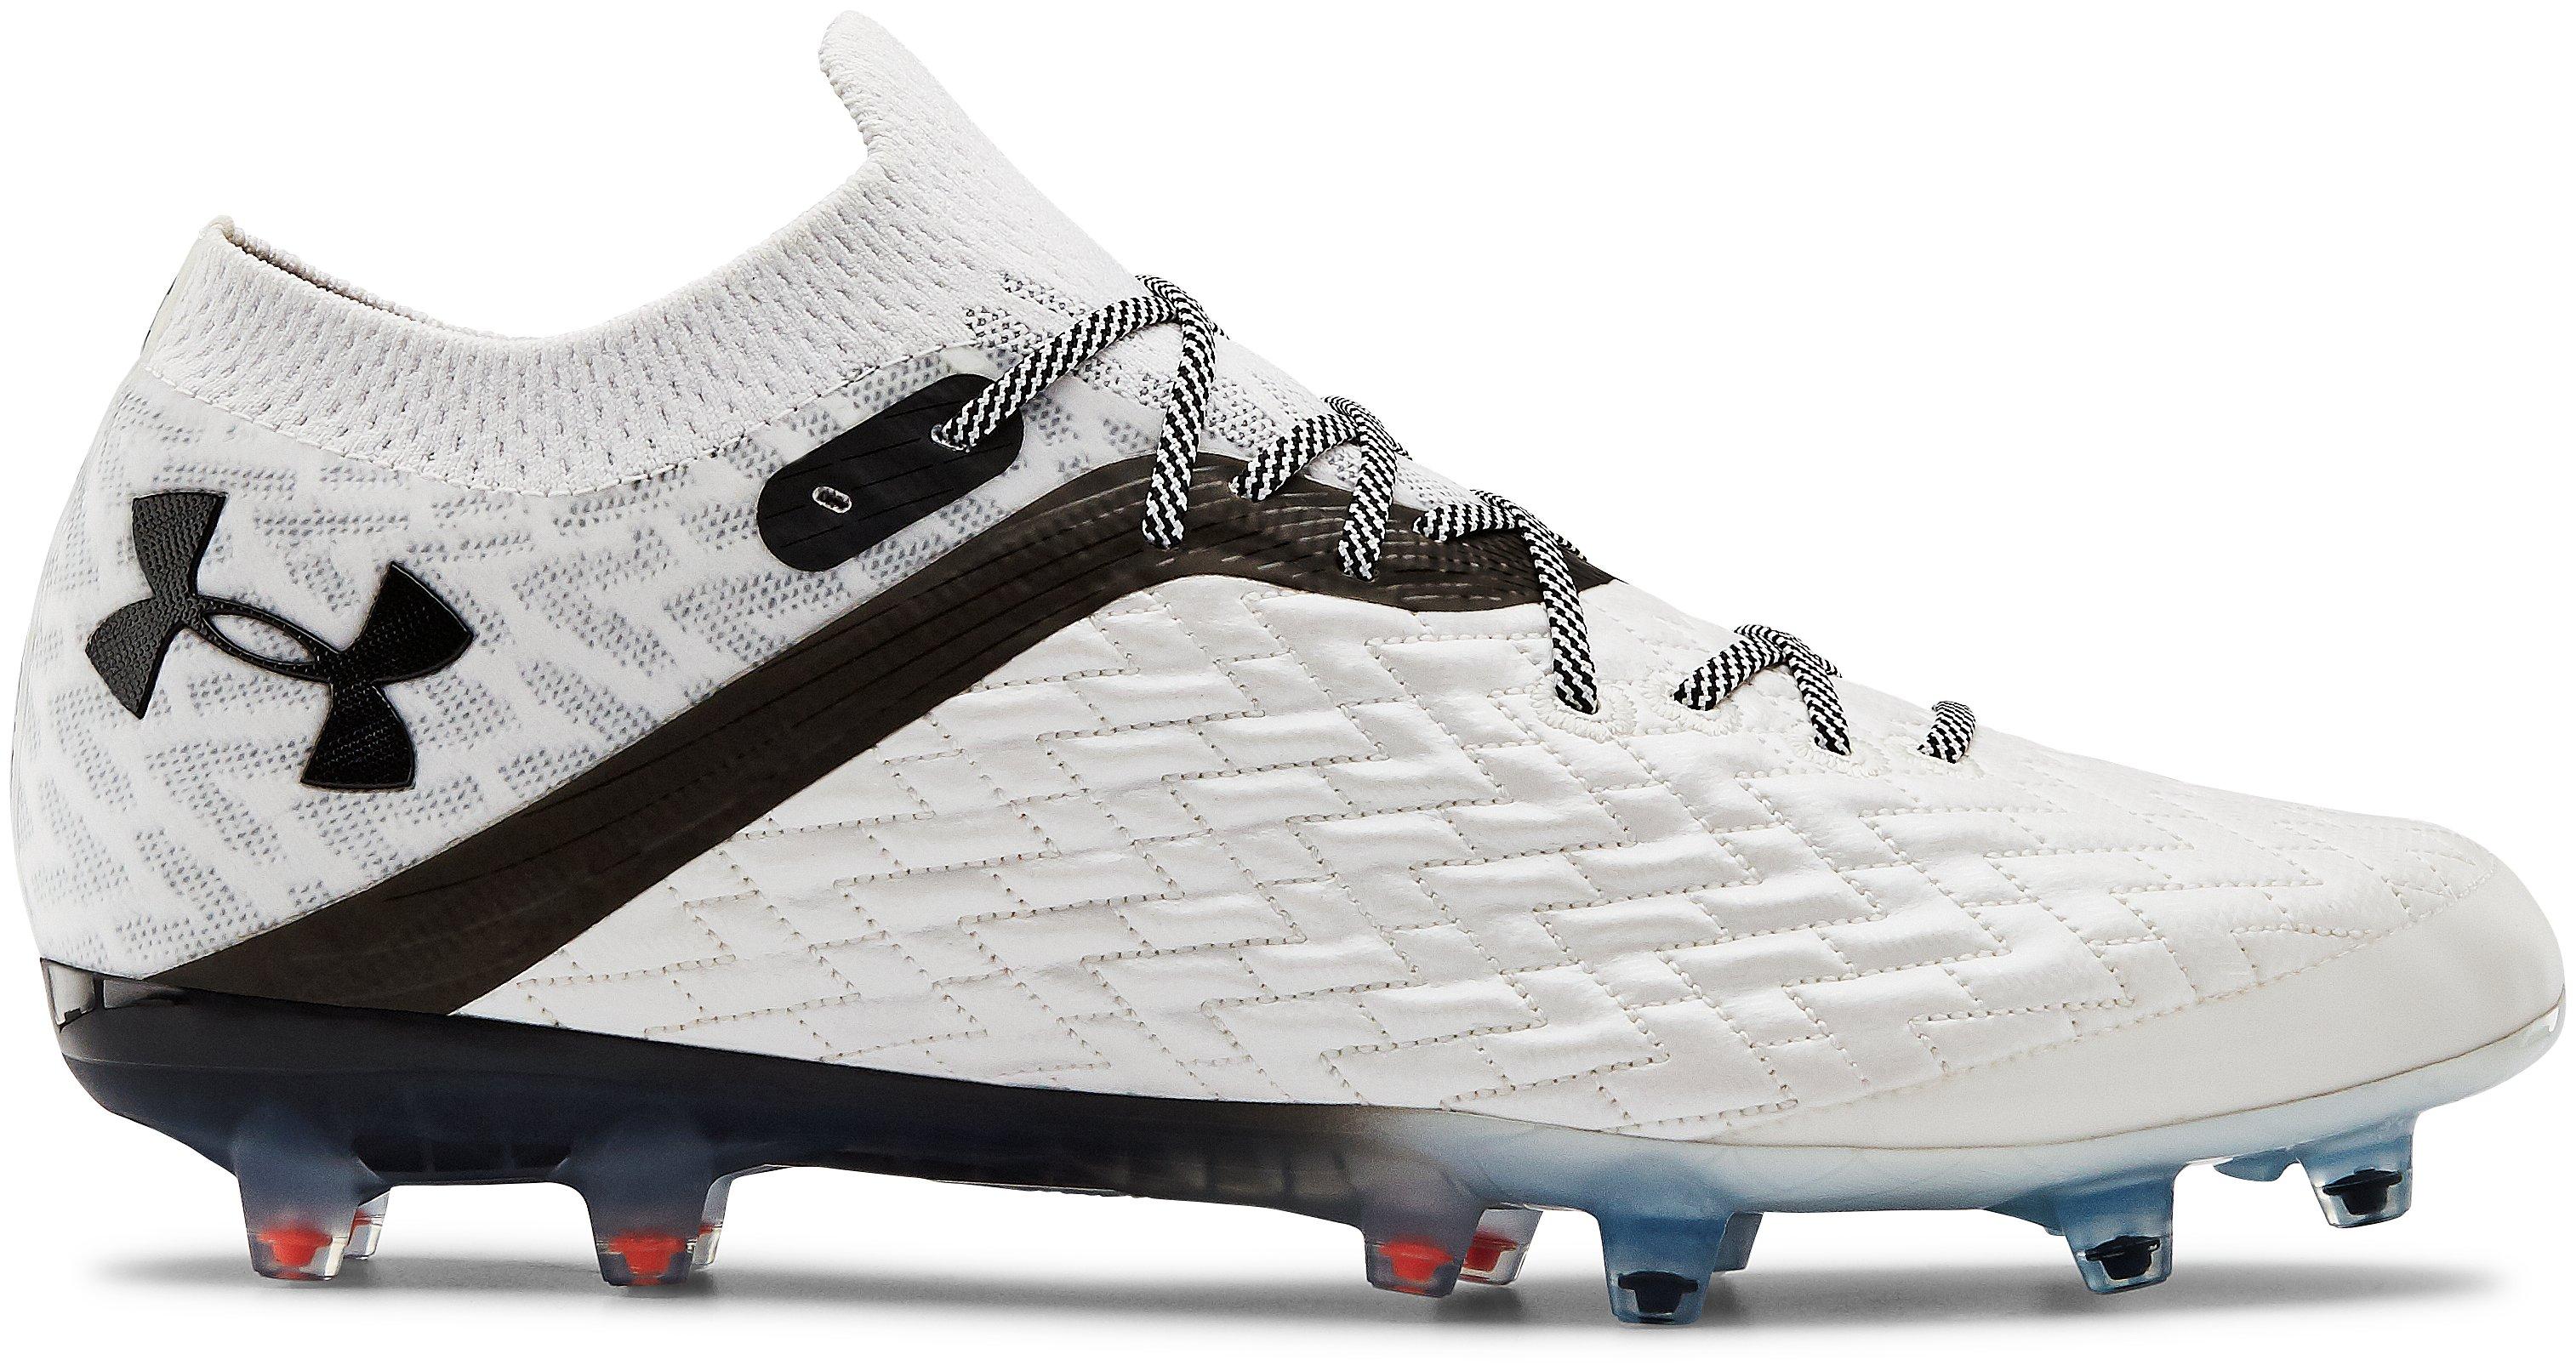 Under Armour Ua Clone Magnetico Pro Fg Soccer Cleats in White | Lyst